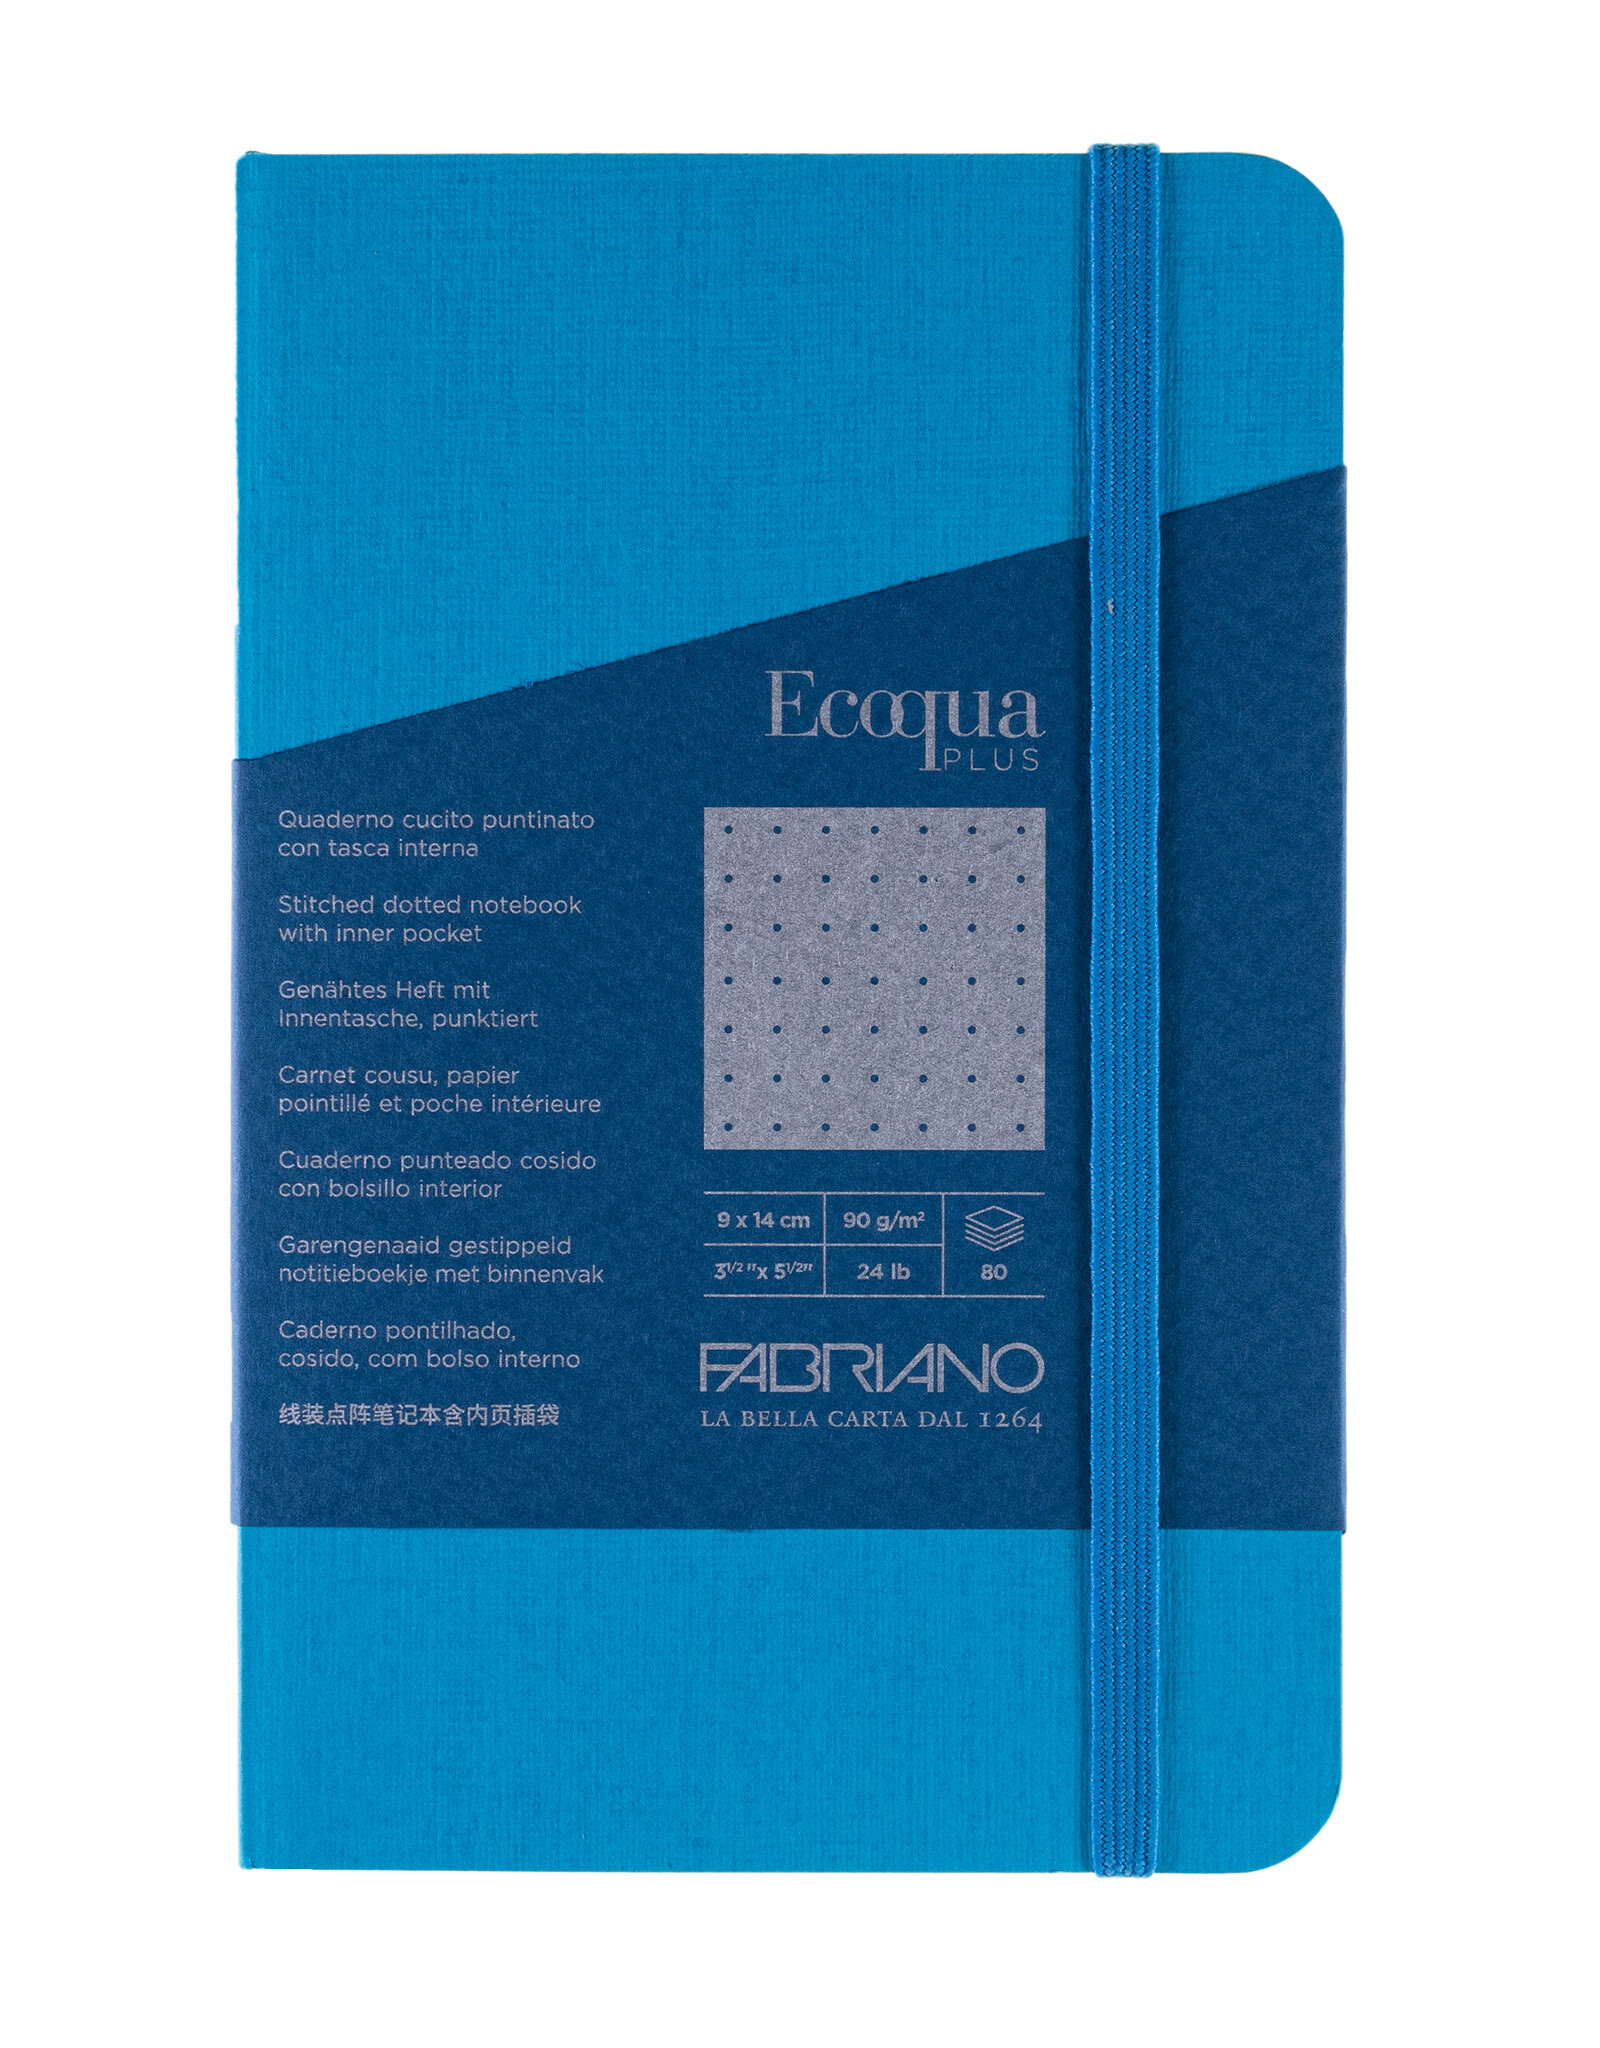 Ecoqua Plus Sewn Spine Notebook, Turquoise, 3.5” x 5.5”, Dotted